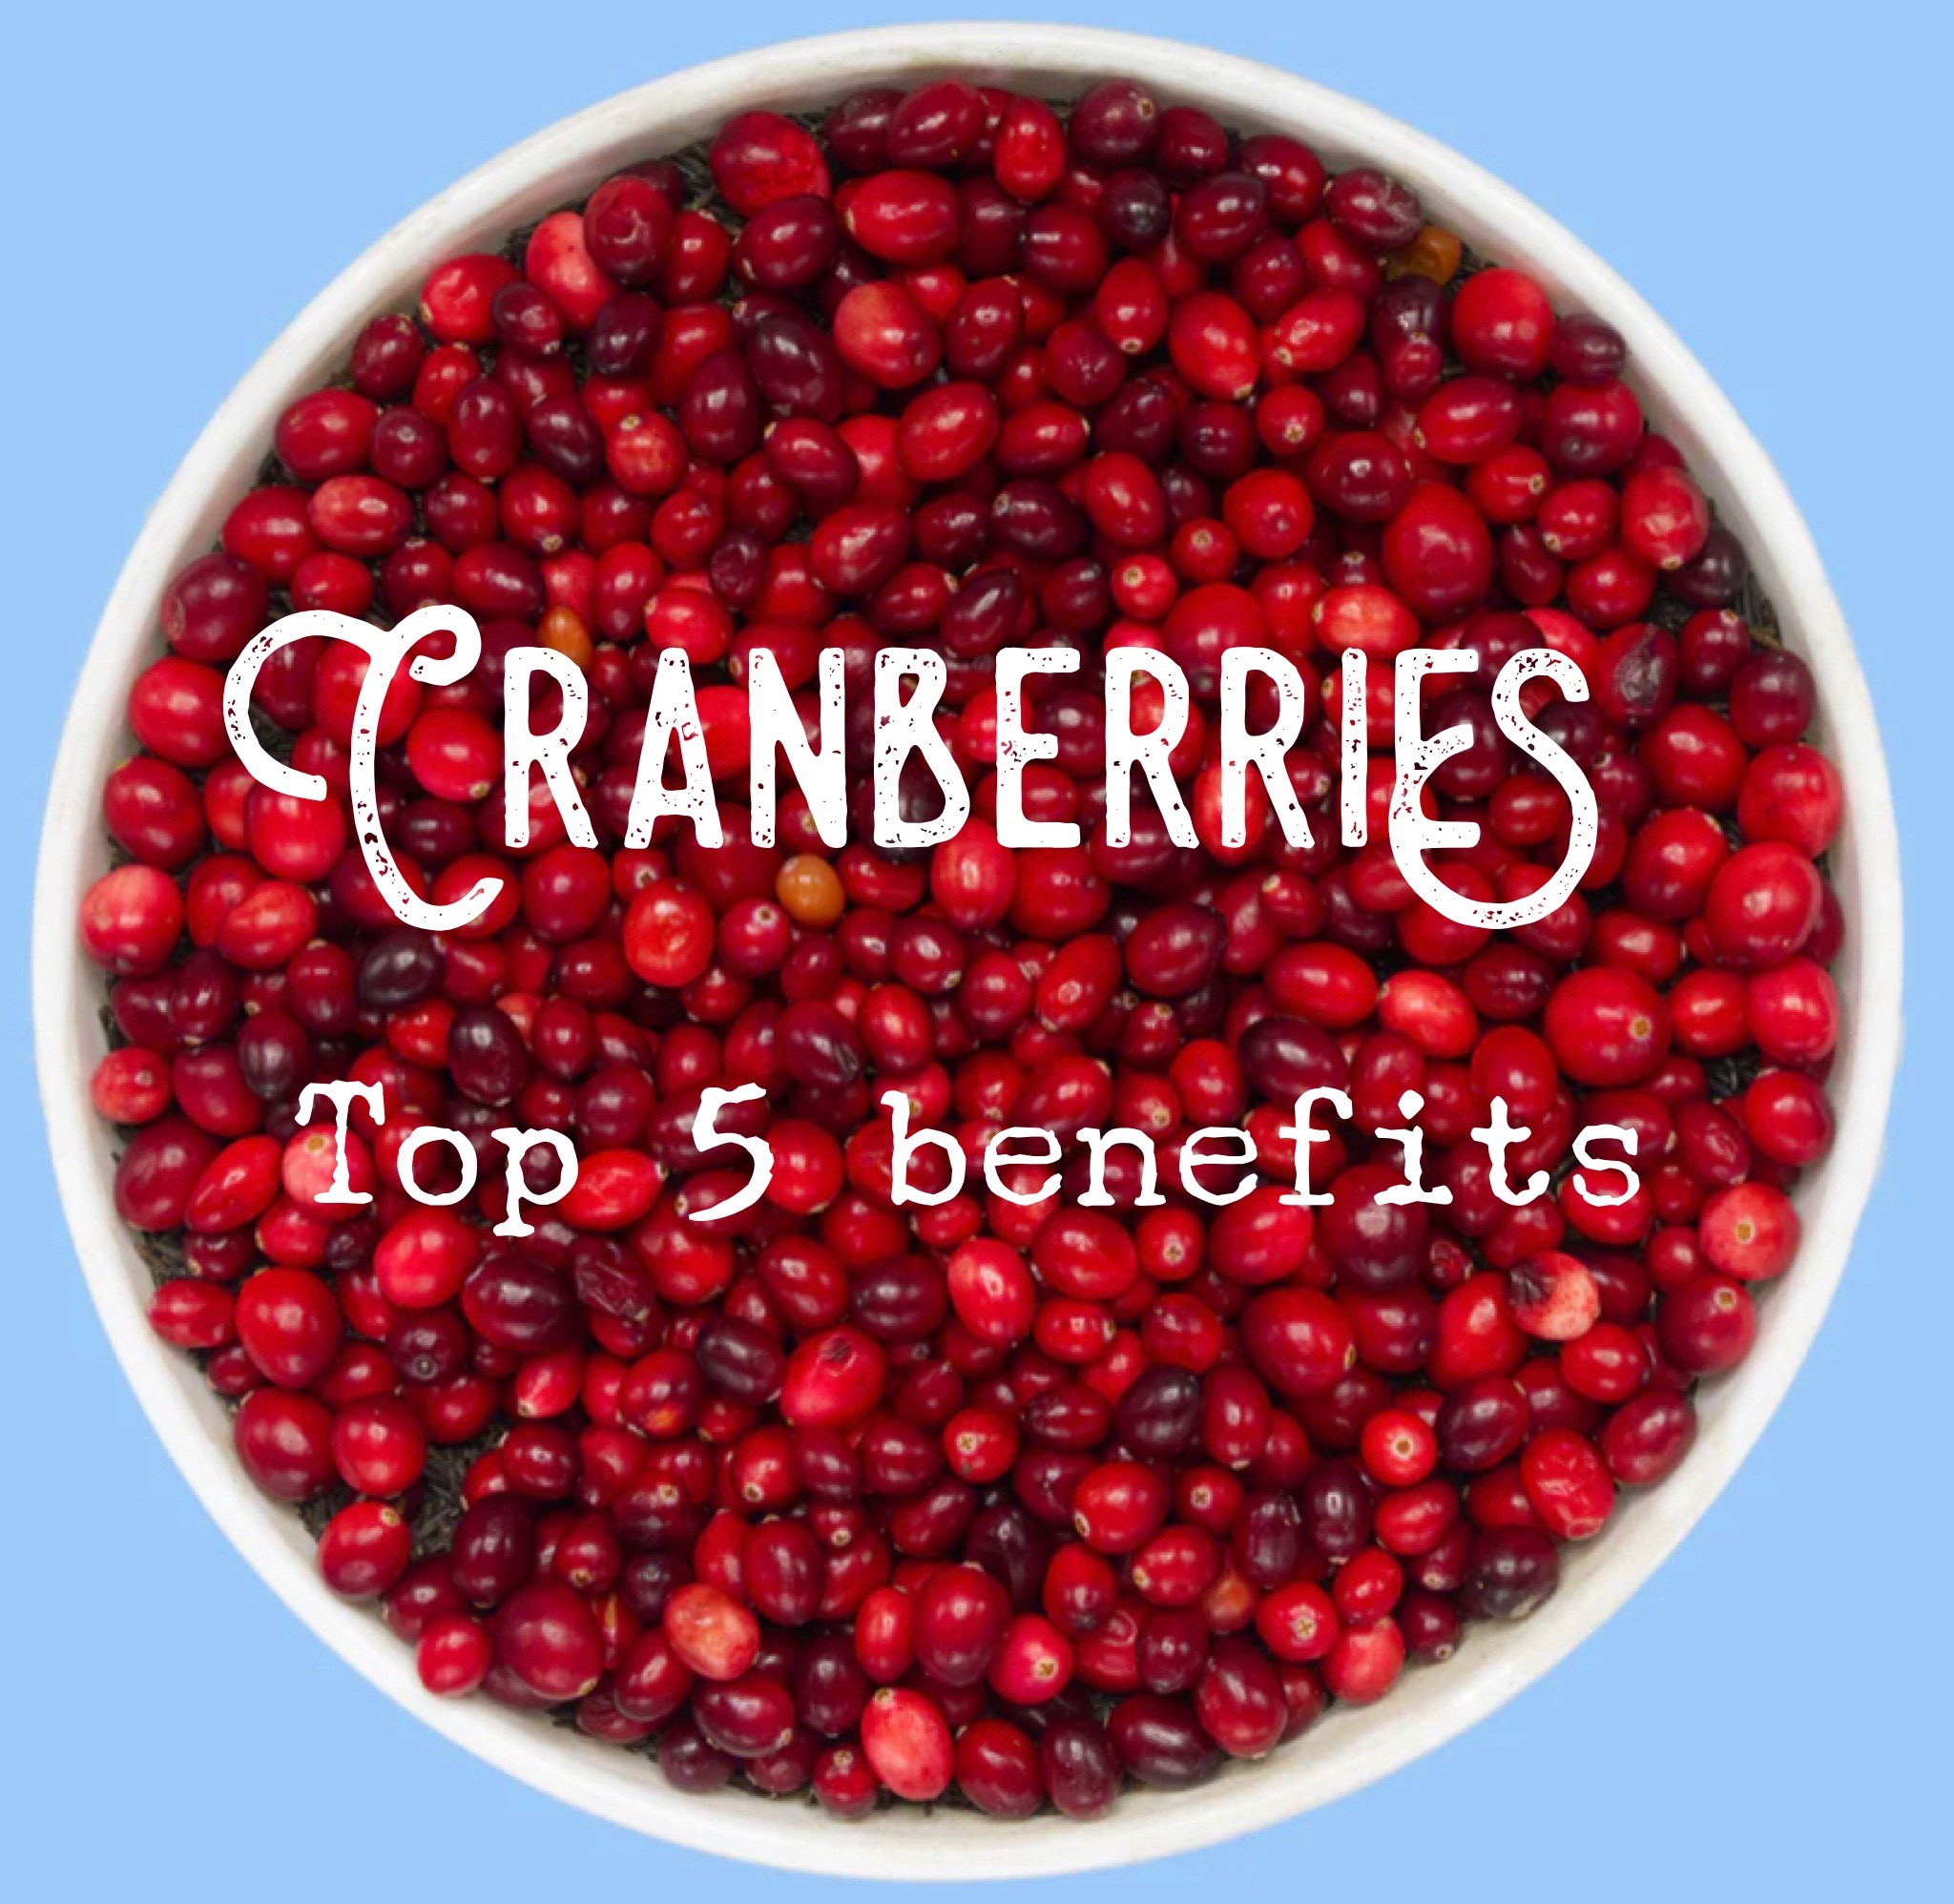 Cranberries - top 5 benefits of adding them to your diet